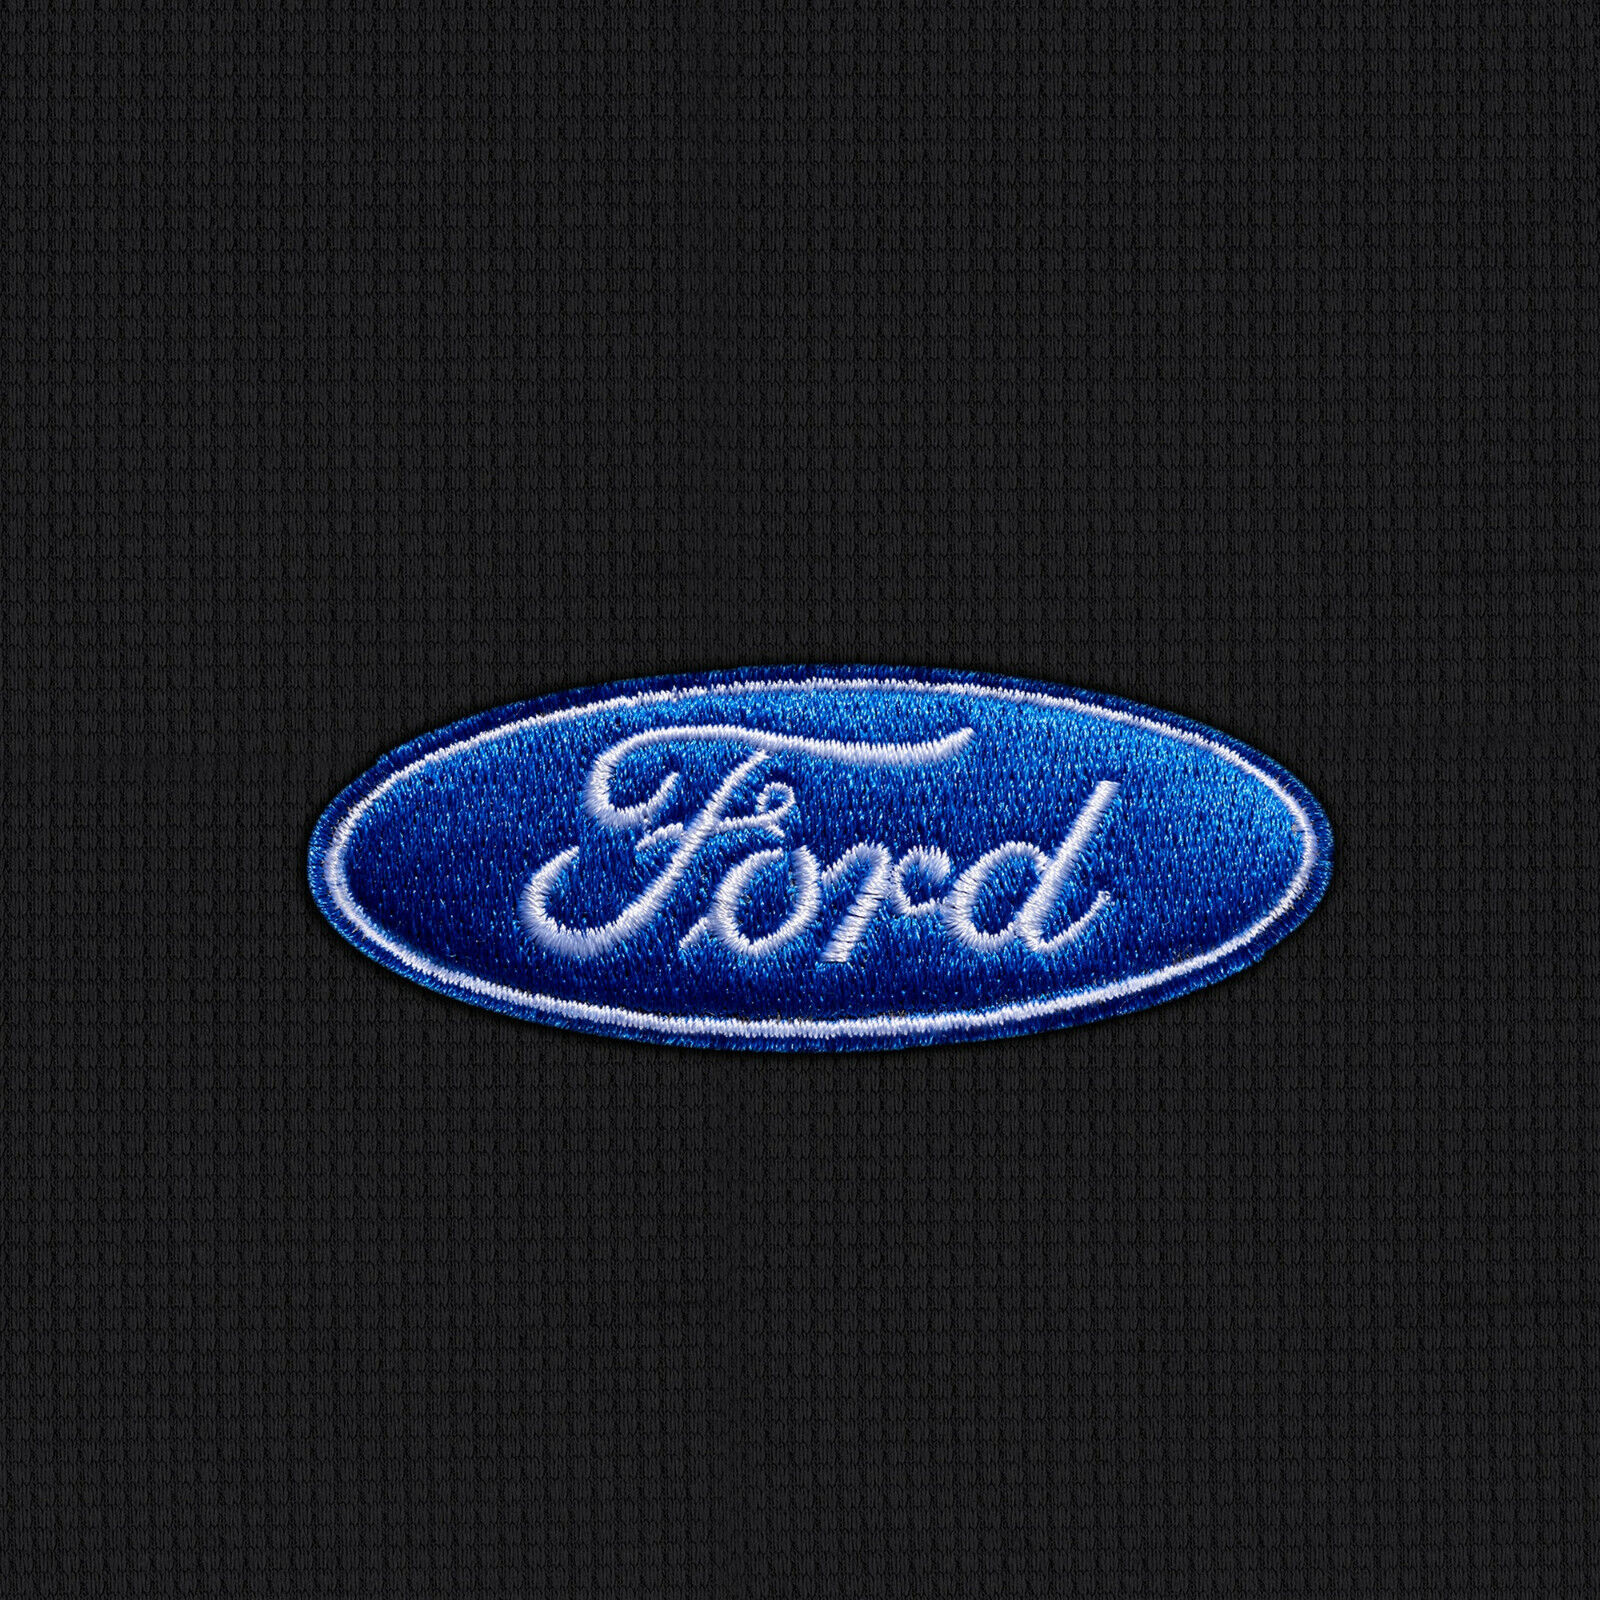 FORD LOGO Ltd Edition Dash Cover for Ford Vehicles DashBoard DashMat CoverCraft